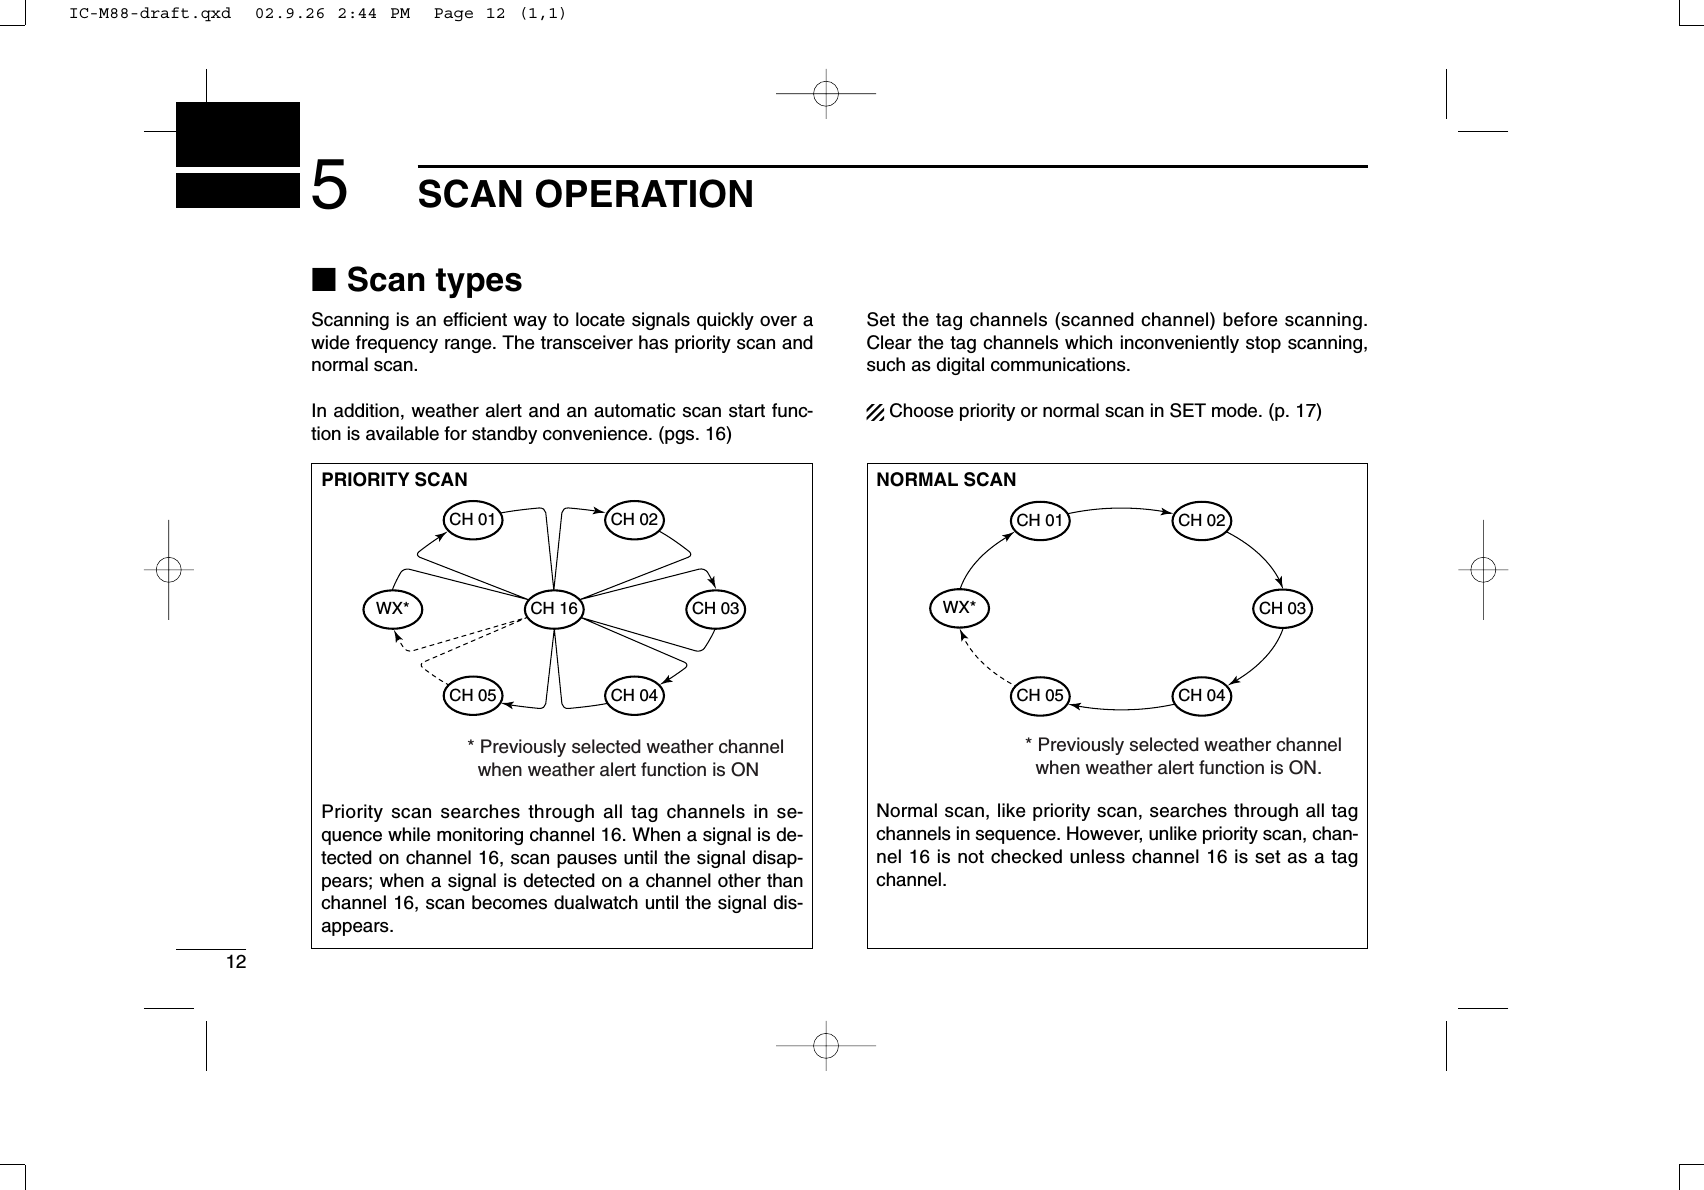 125SCAN OPERATION■Scan typesScanning is an efﬁcient way to locate signals quickly over awide frequency range. The transceiver has priority scan andnormal scan.In addition, weather alert and an automatic scan start func-tion is available for standby convenience. (pgs. 16)Set the tag channels (scanned channel) before scanning.Clear the tag channels which inconveniently stop scanning,such as digital communications.Choose priority or normal scan in SET mode. (p. 17)NORMAL SCANNormal scan, like priority scan, searches through all tagchannels in sequence. However, unlike priority scan, chan-nel 16 is not checked unless channel 16 is set as a tagchannel.CH 01 CH 02WX*CH 05 CH 04CH 03* Previously selected weather channel   when weather alert function is ON.PRIORITY SCANPriority scan searches through all tag channels in se-quence while monitoring channel 16. When a signal is de-tected on channel 16, scan pauses until the signal disap-pears; when a signal is detected on a channel other thanchannel 16, scan becomes dualwatch until the signal dis-appears.WX*CH 01CH 16CH 02CH 05 CH 04CH 03* Previously selected weather channel   when weather alert function is ONIC-M88-draft.qxd  02.9.26 2:44 PM  Page 12 (1,1)